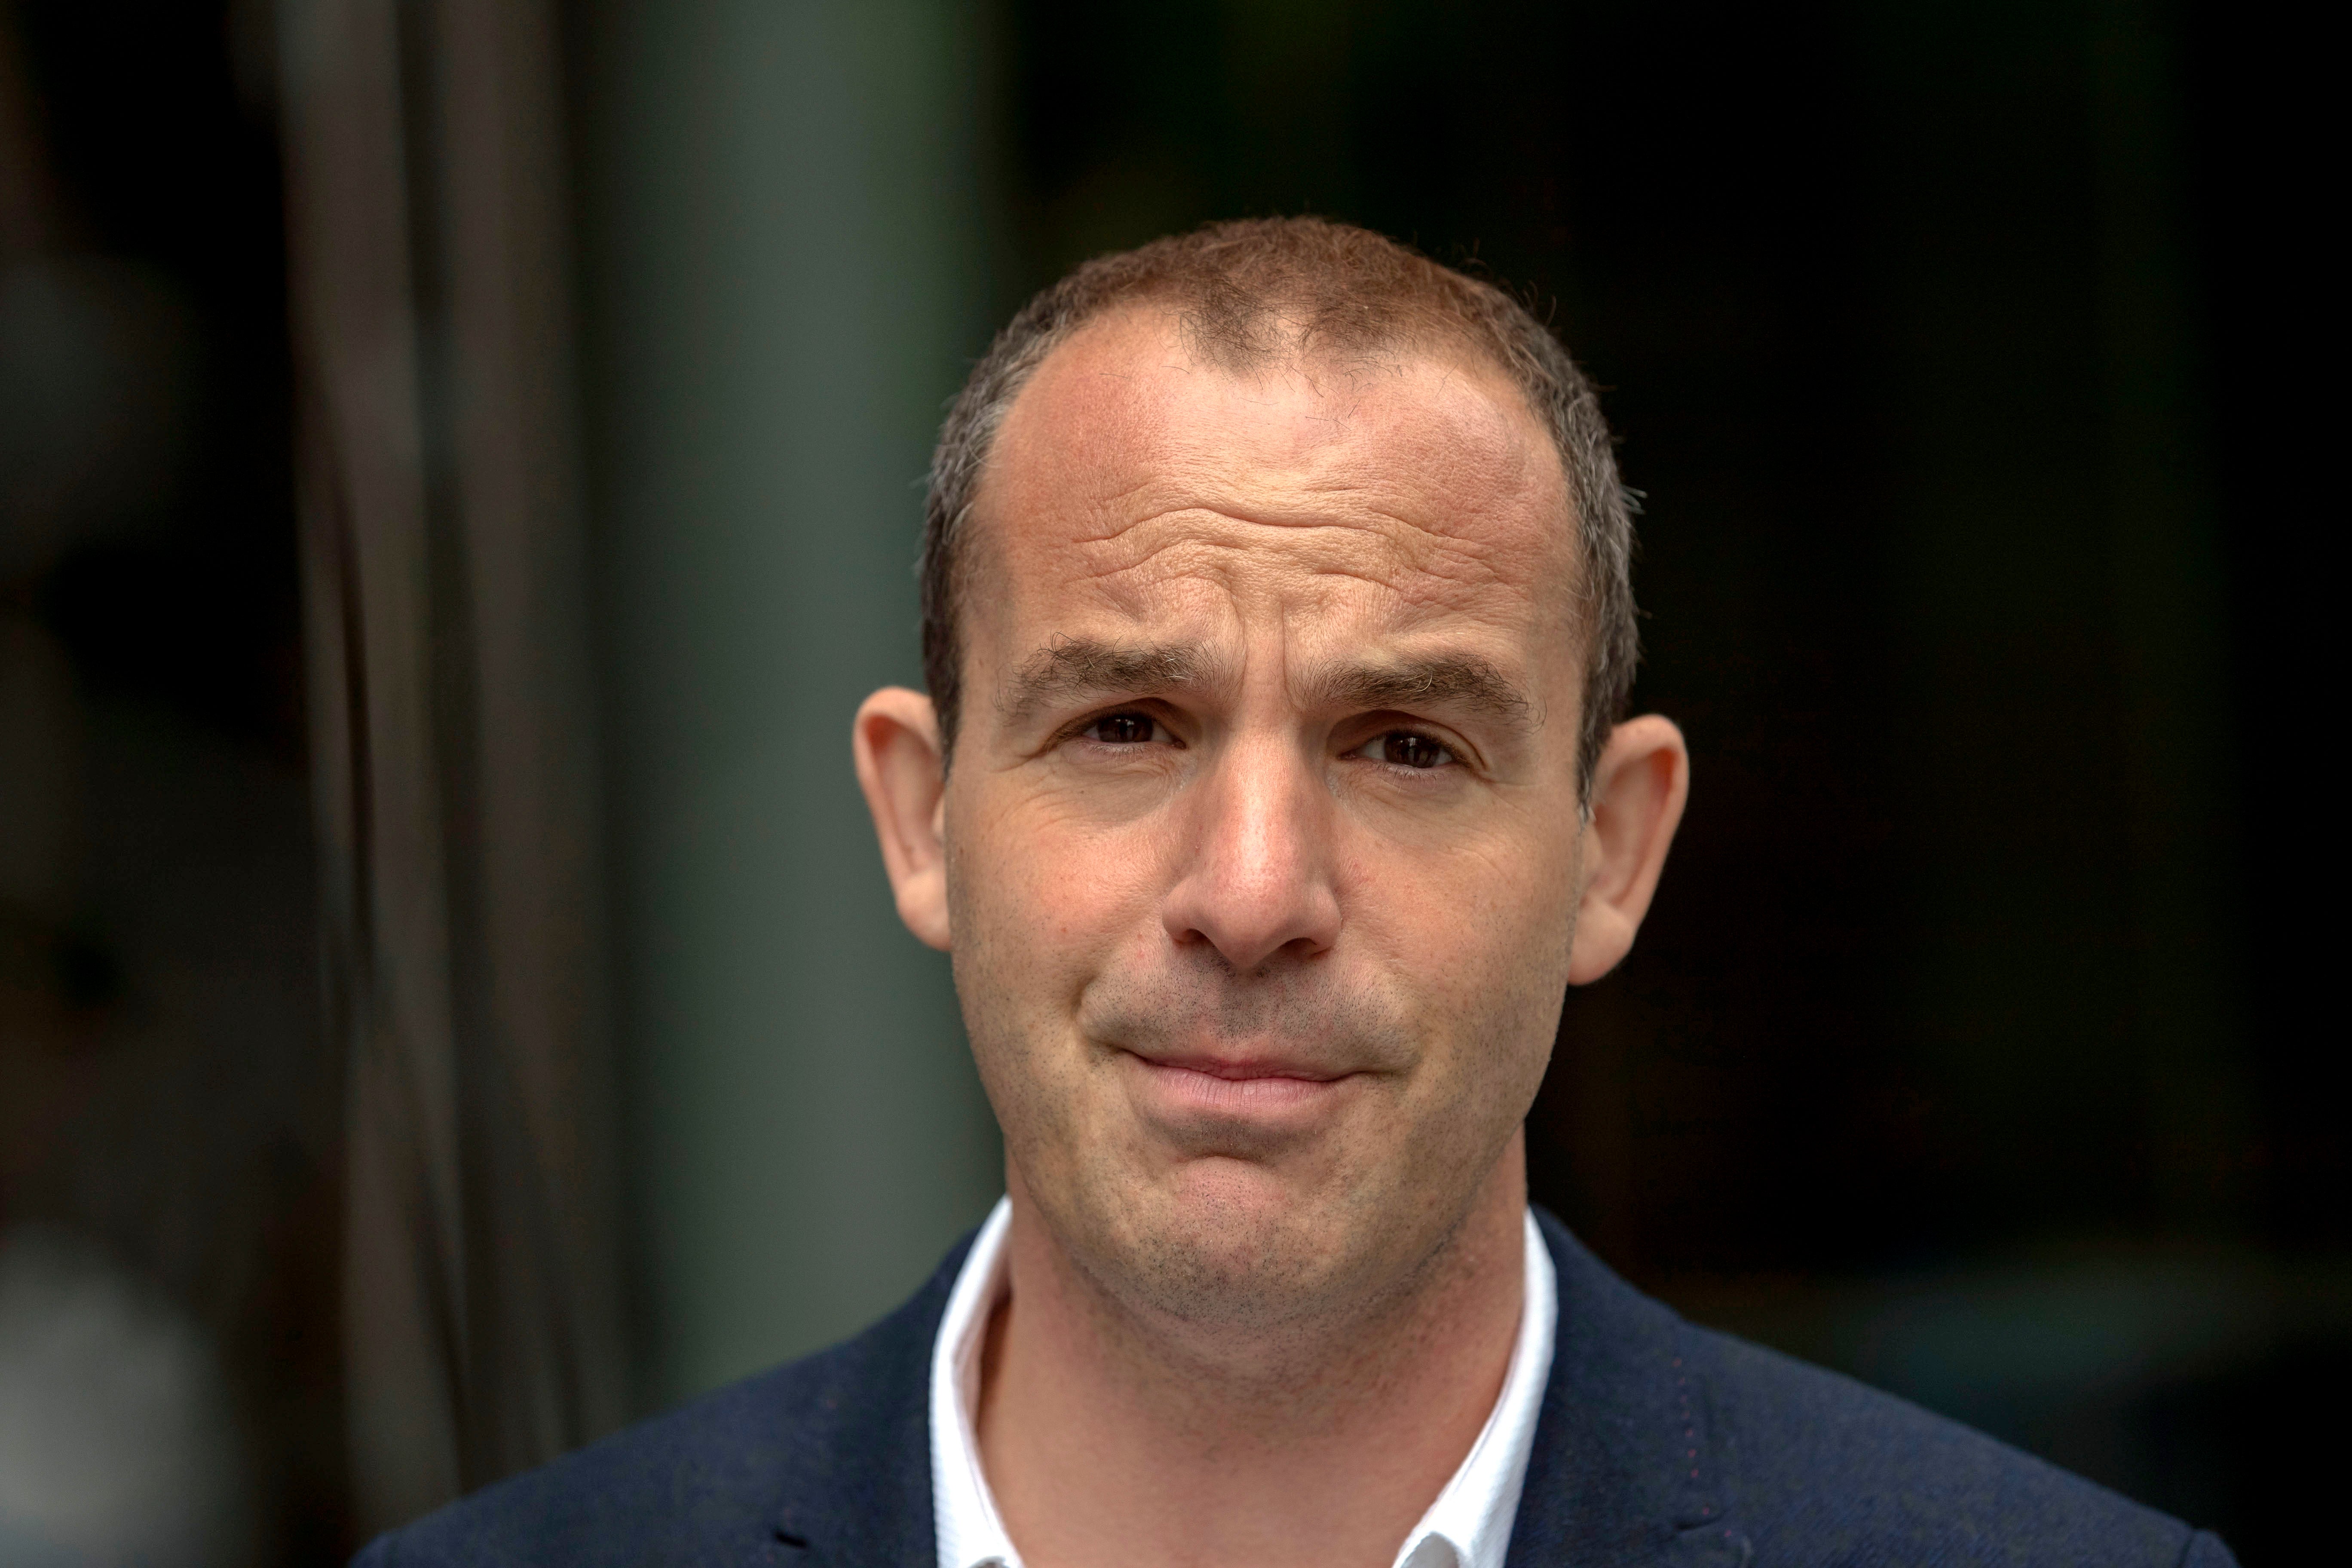 Consumer champion Martin Lewis described the situation as ‘catastrophic’ (Steve Parsons/PA)